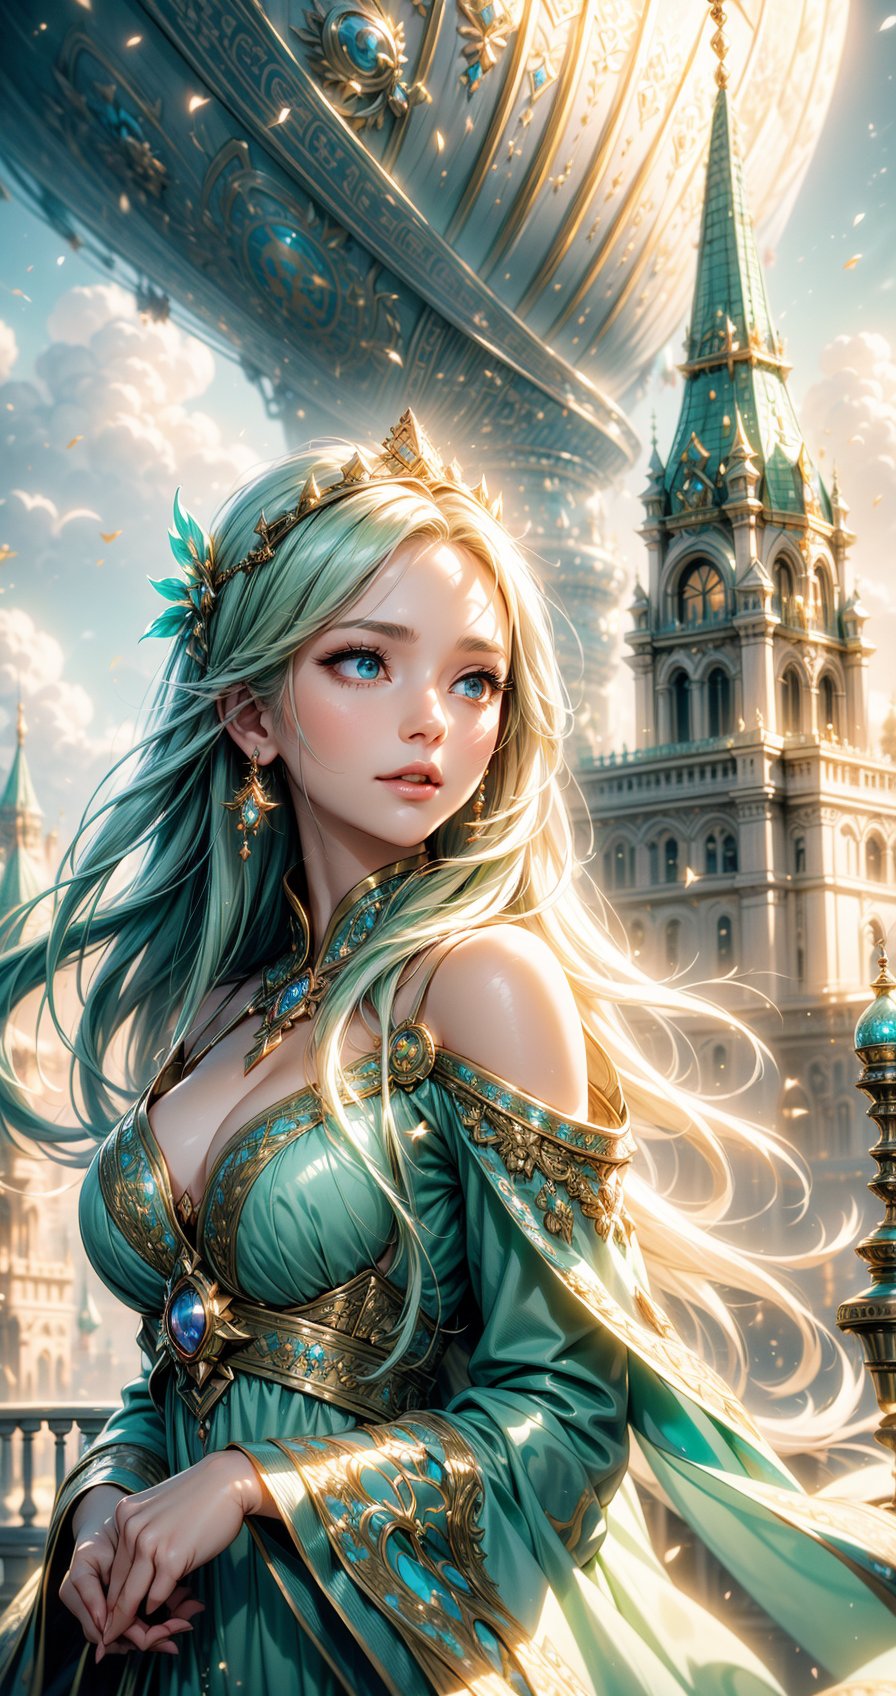 ((serene girl)) A city on clouds, with flowing hair,detailed face, detailed eyes, detailed hands, vivid and lively surroundings, tall and elegant buildings, airships in the sky, enchanting gardens, calm and tranquil mood, magical atmosphere, benevolent deity's reign over a sky kingdom, inhabitants living harmoniously with nature, distinct and beautiful architectural style, breathtaking landscape.